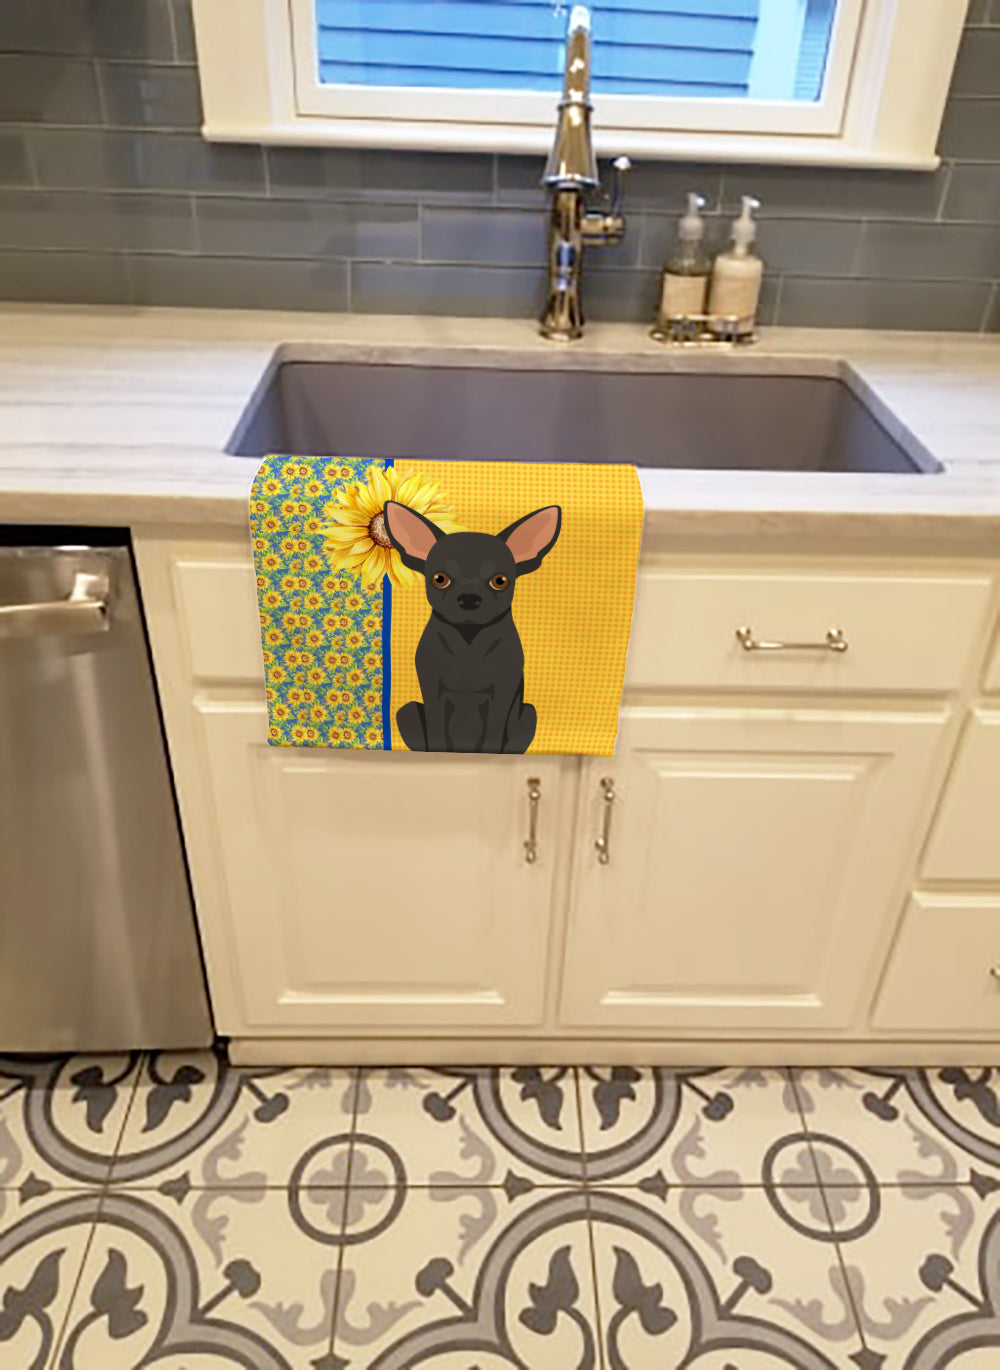 Buy this Summer Sunflowers Black Chihuahua Kitchen Towel